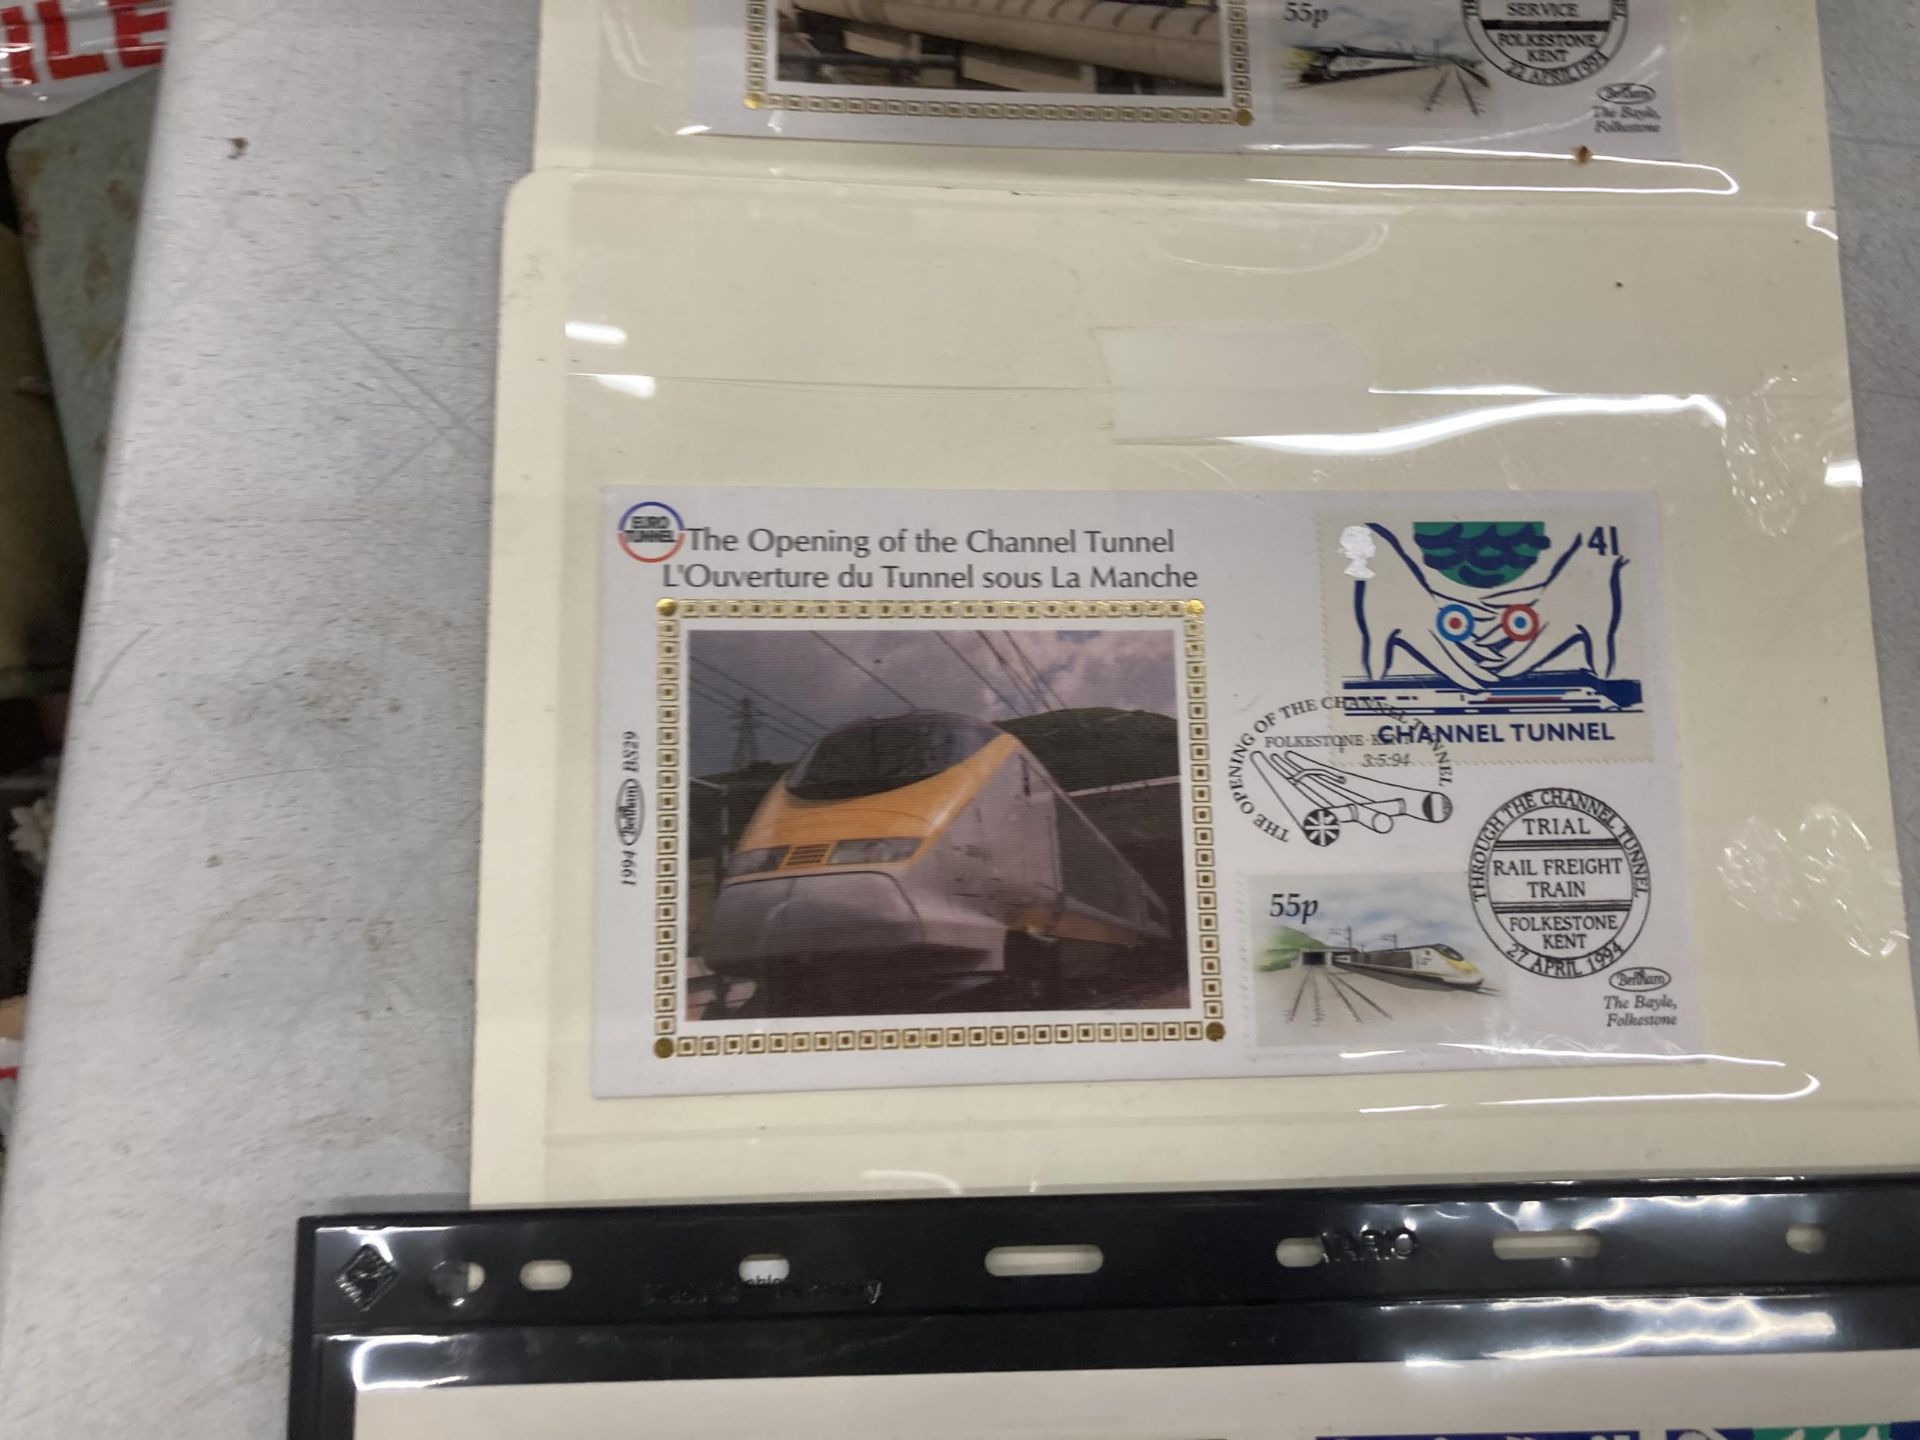 A CHANNEL TUNNEL / LE SHUTTLE LOT - NOVELTY SADLER TEAPOT AND STAMPS - Image 3 of 4